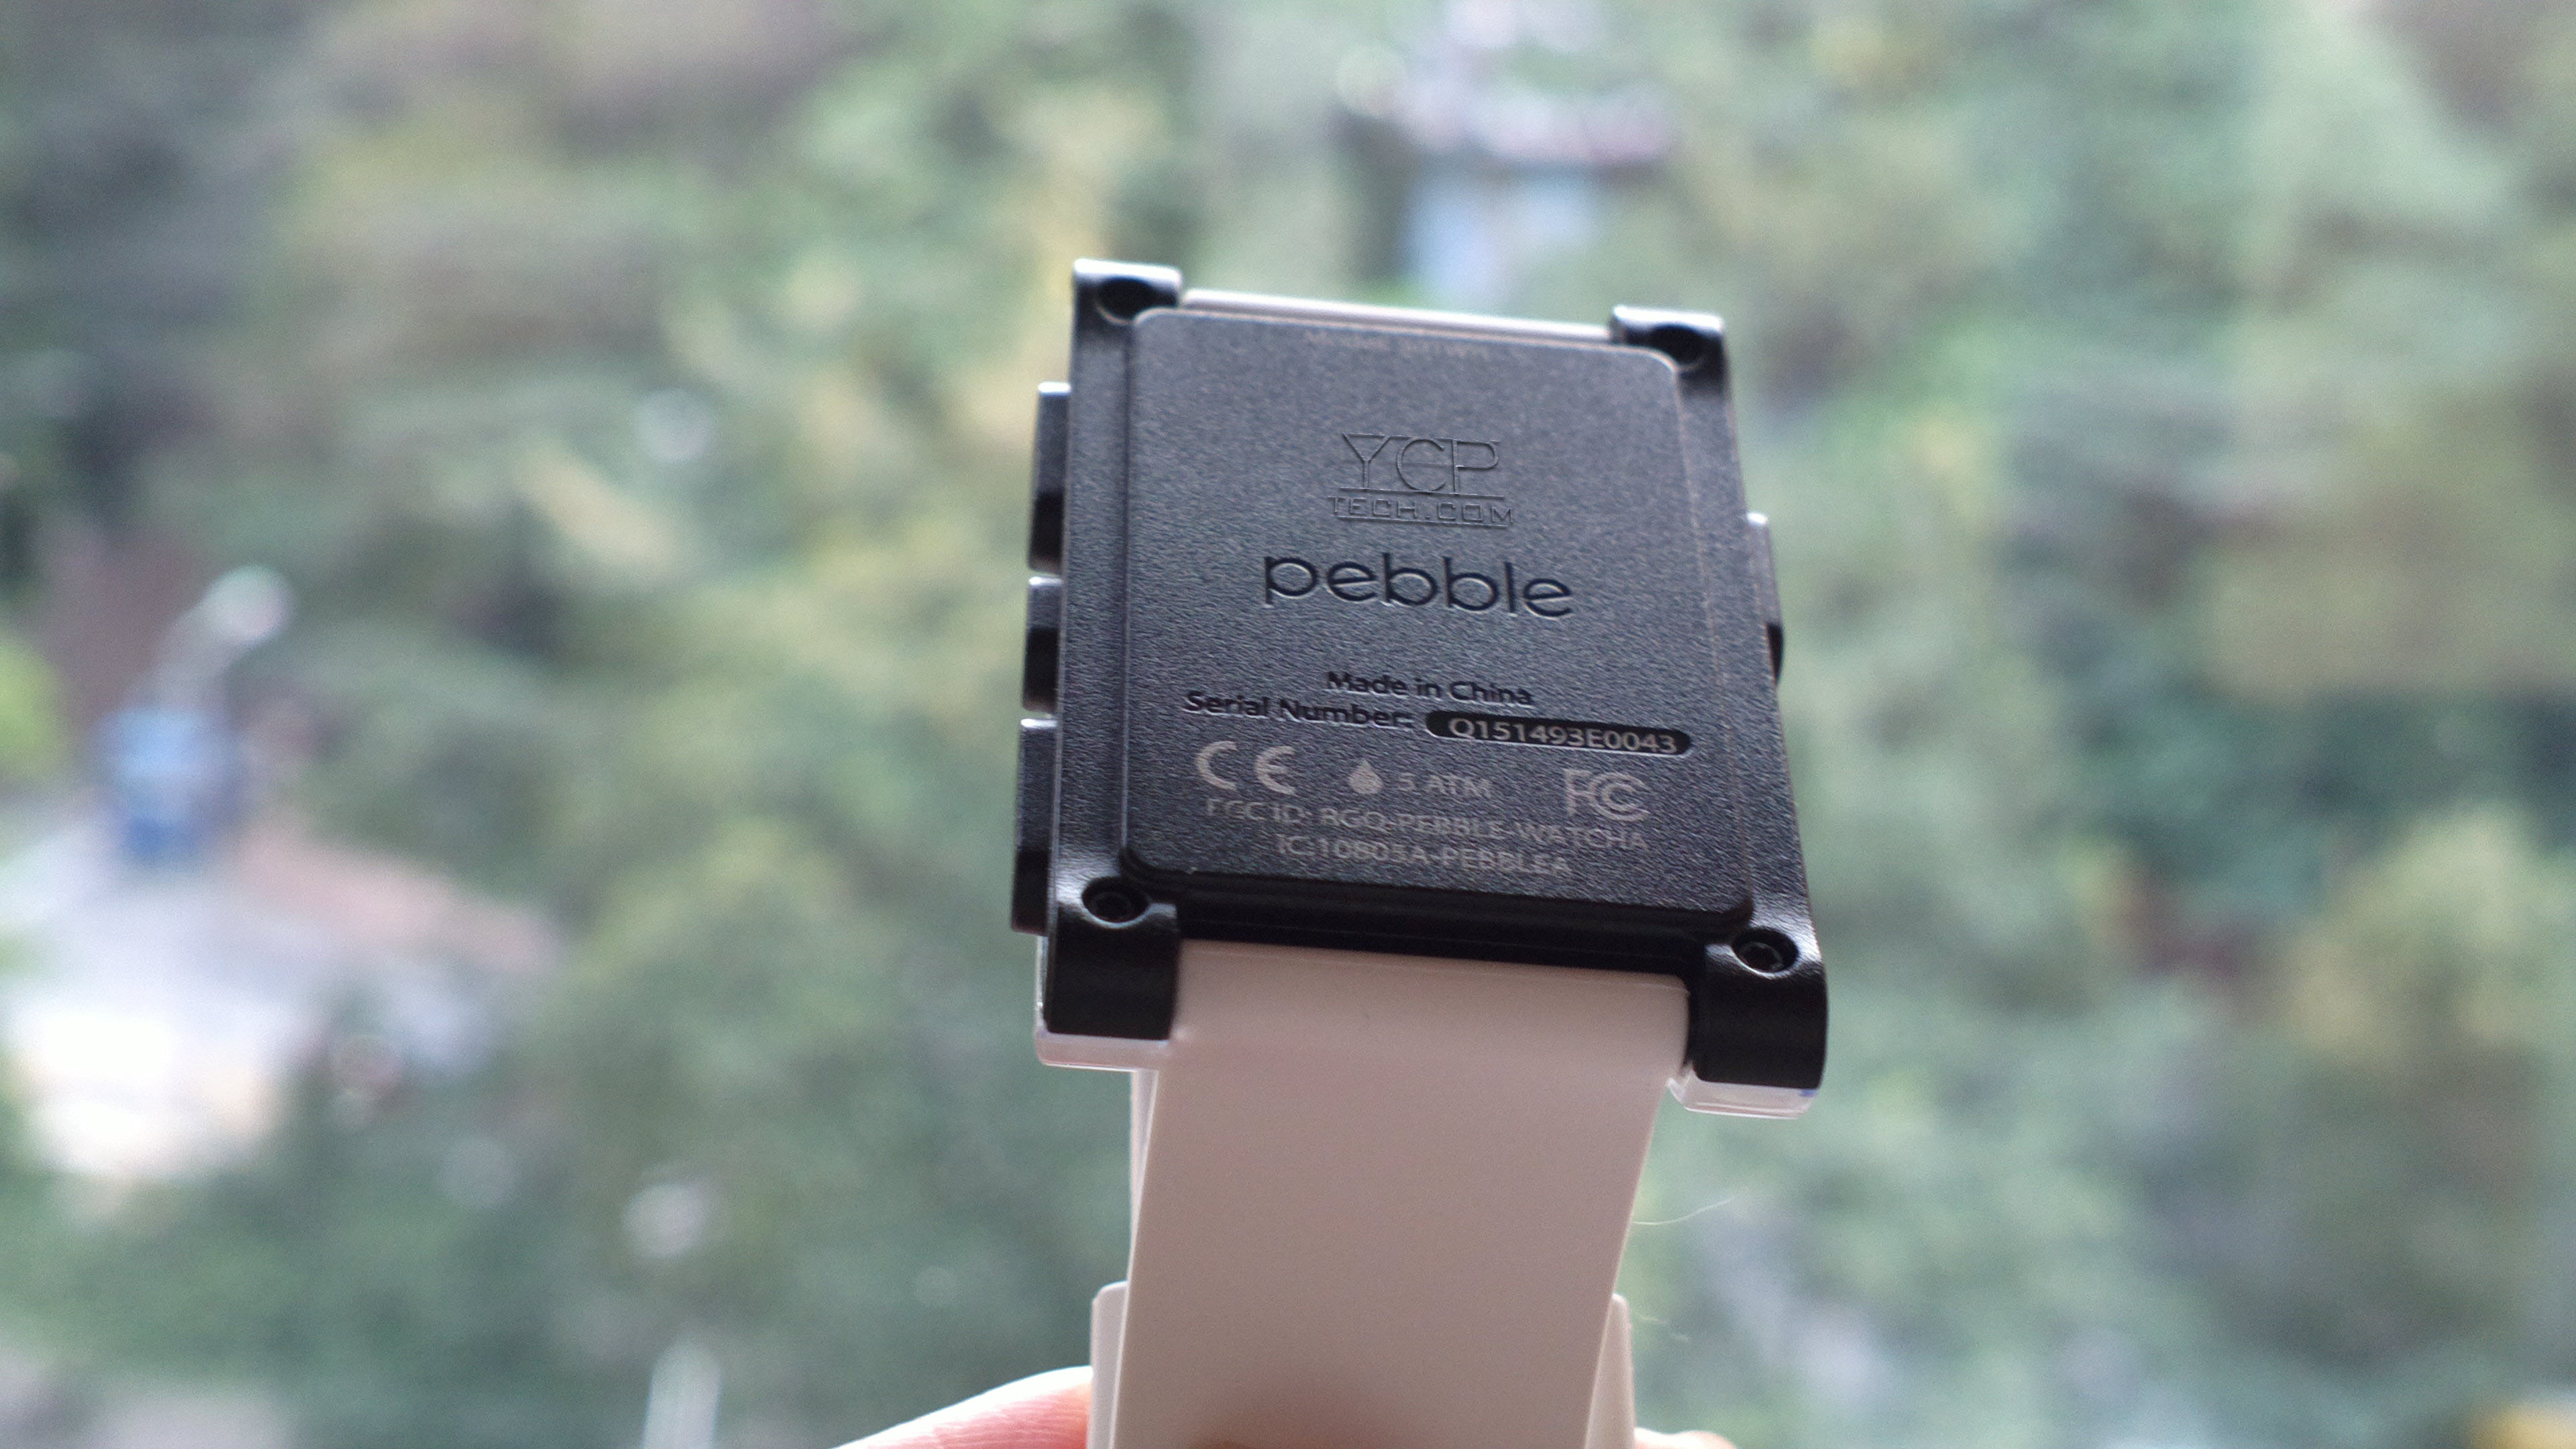 ycp pebble review back